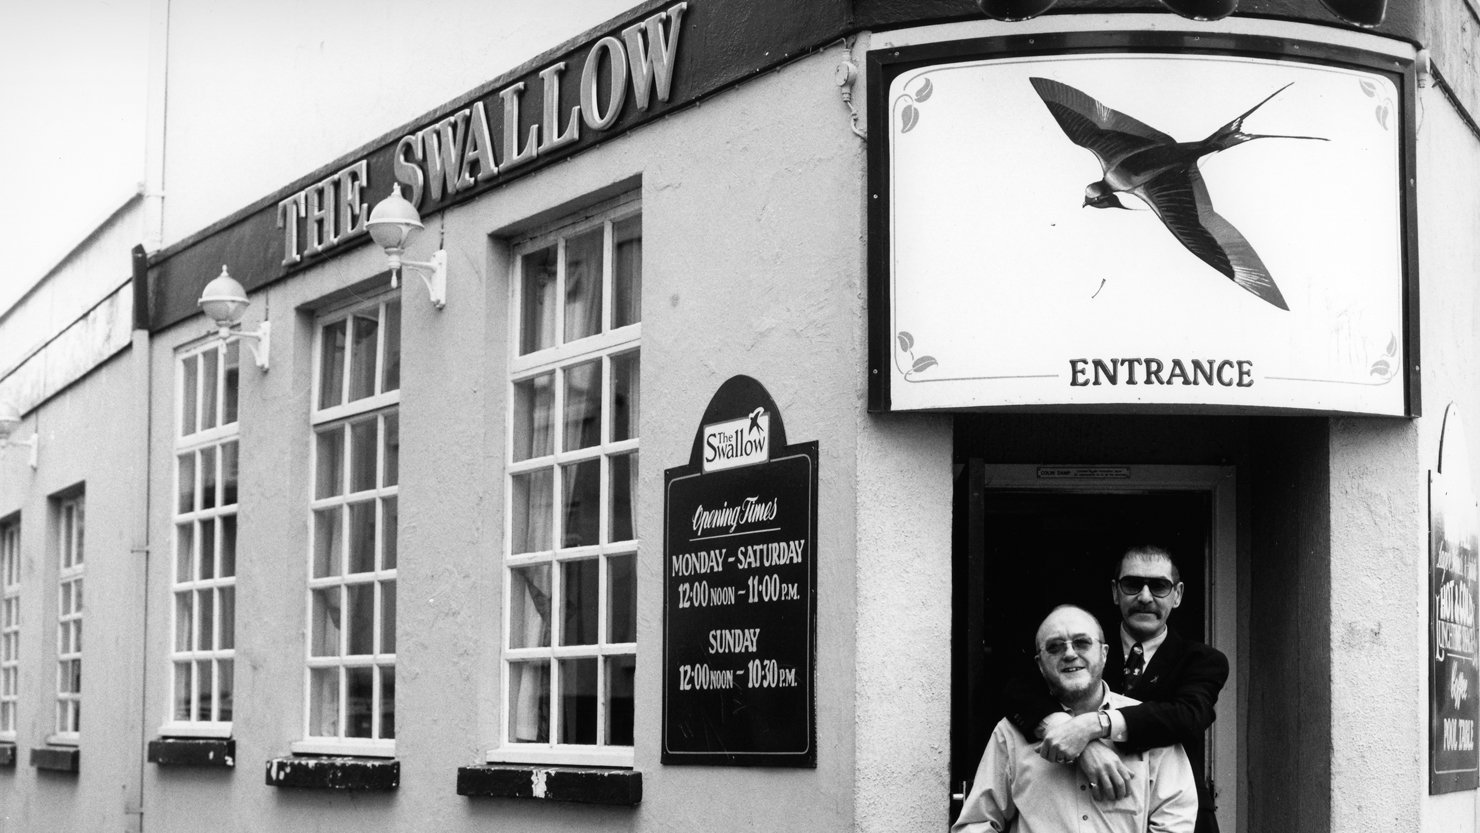 Black and white image of two men standing together in the entrance of The Swallow pub in Plymouth